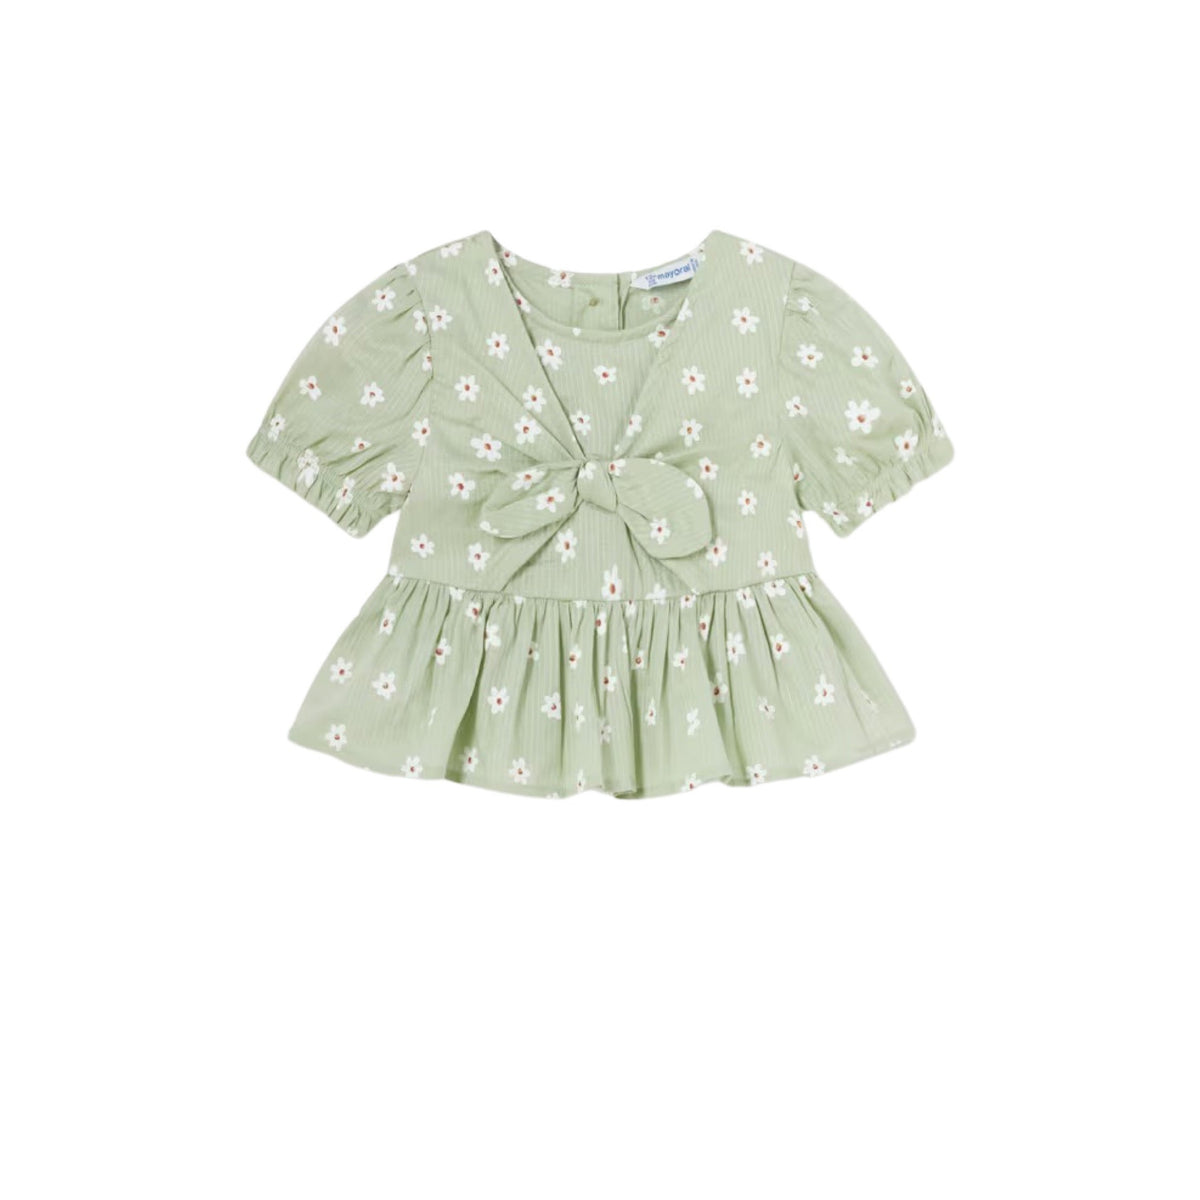 Baby Sage Top with Bow &amp; White Daisy Print